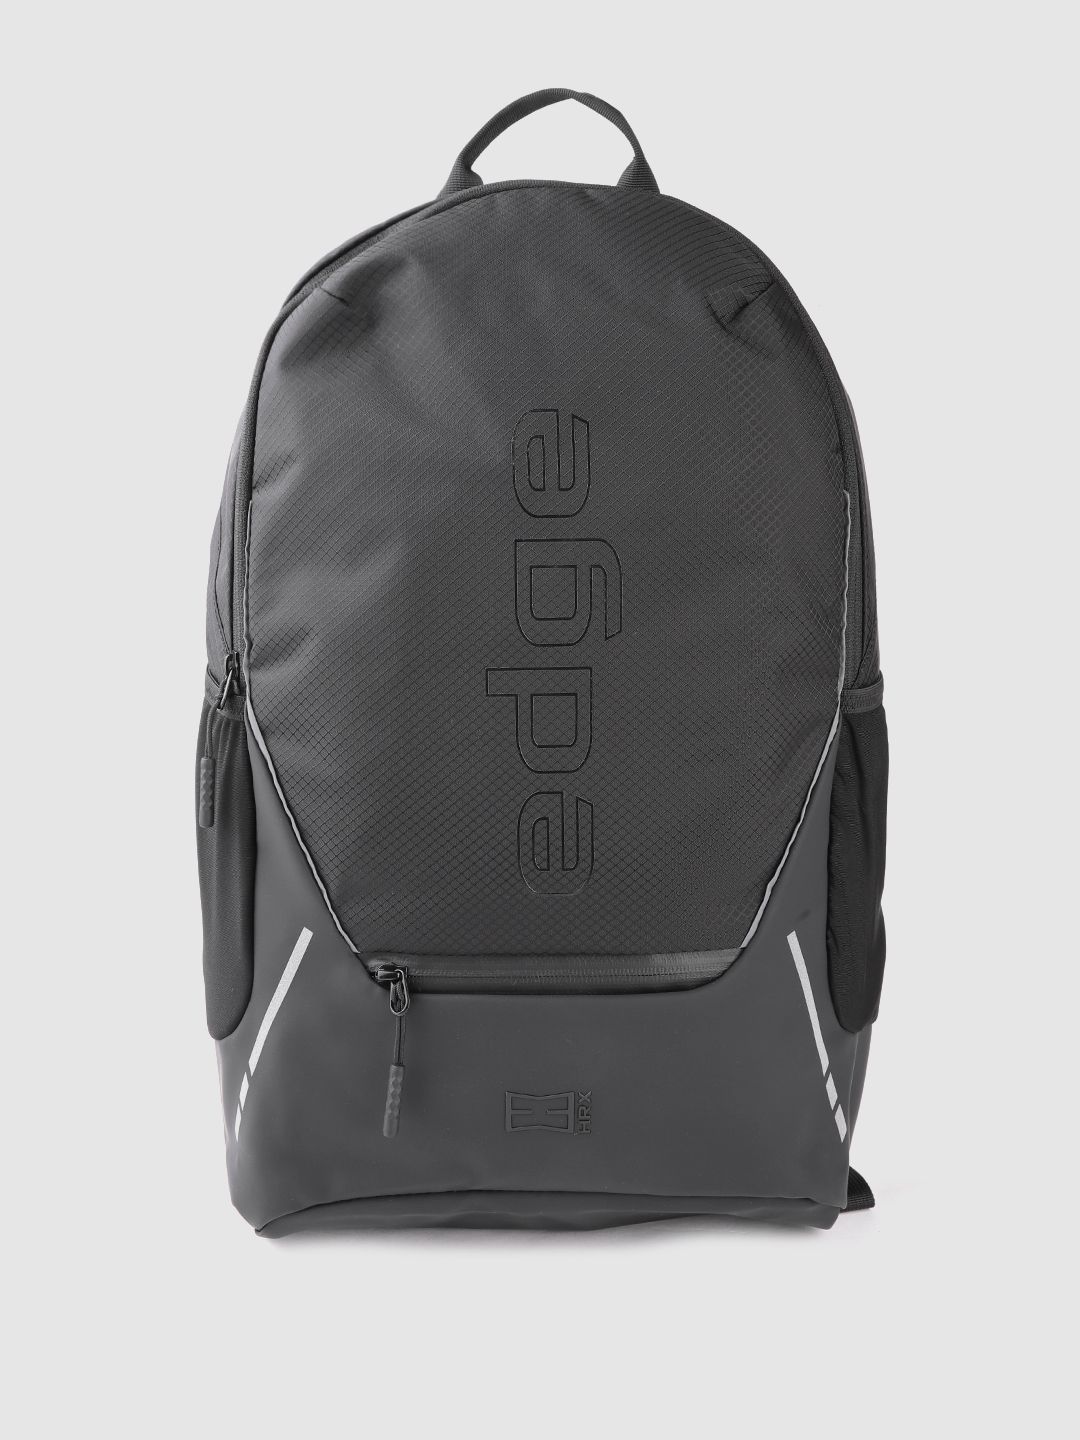 HRX by Hrithik Roshan Unisex Black Typography Backpack with Reflective Strip Price in India